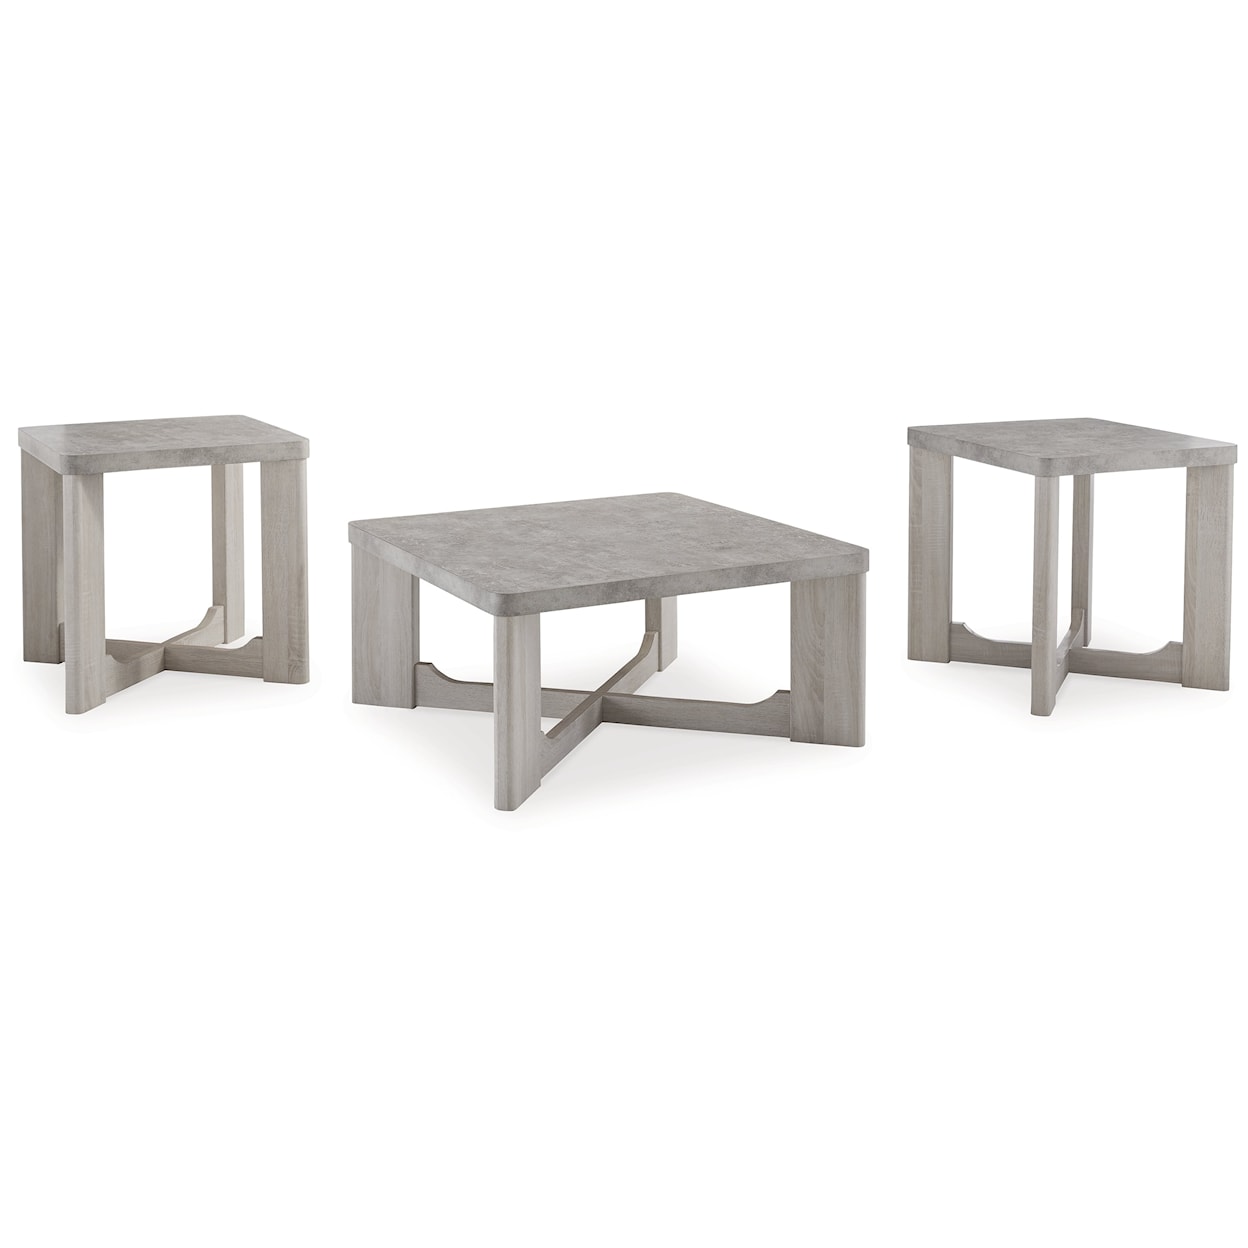 Signature Design by Ashley Garnilly Occasional Table Set